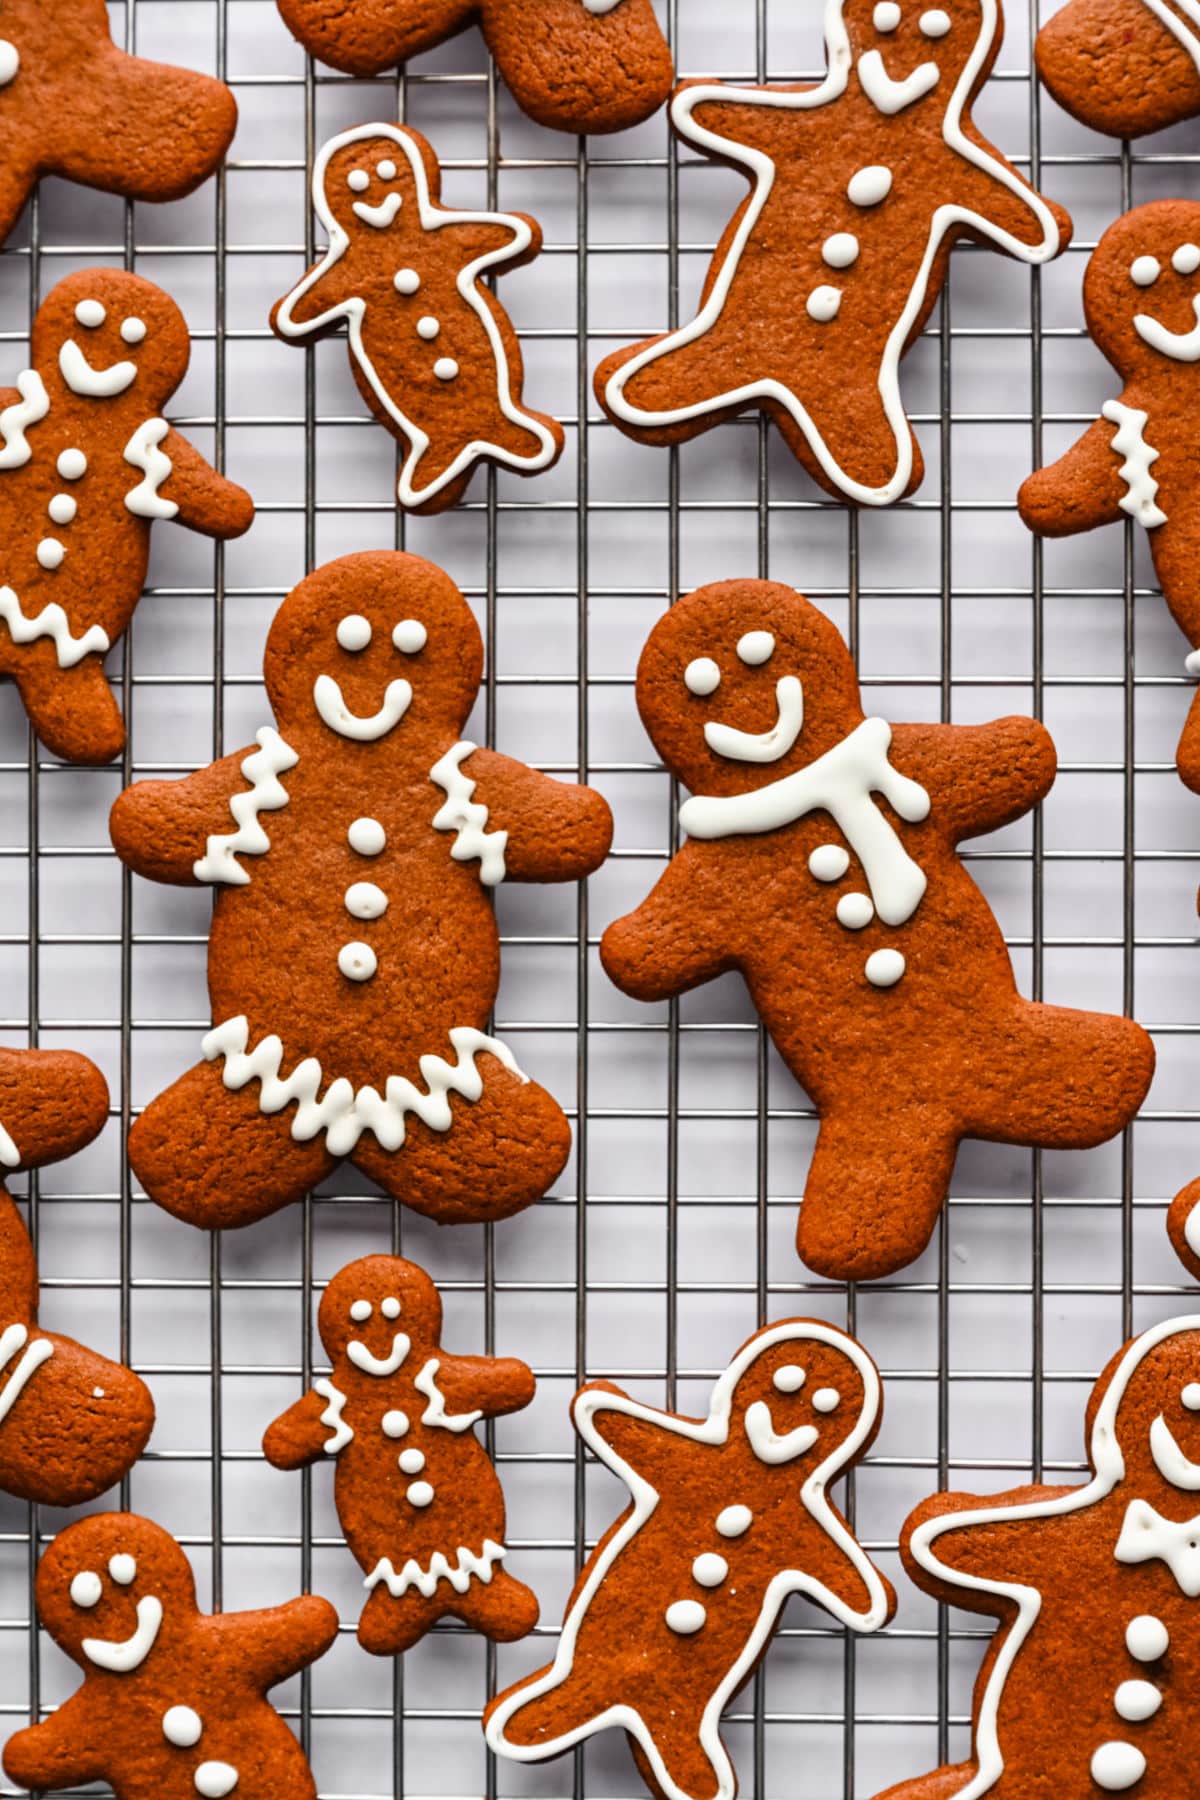 Decorated gingerbread men on a wire cooling rack.